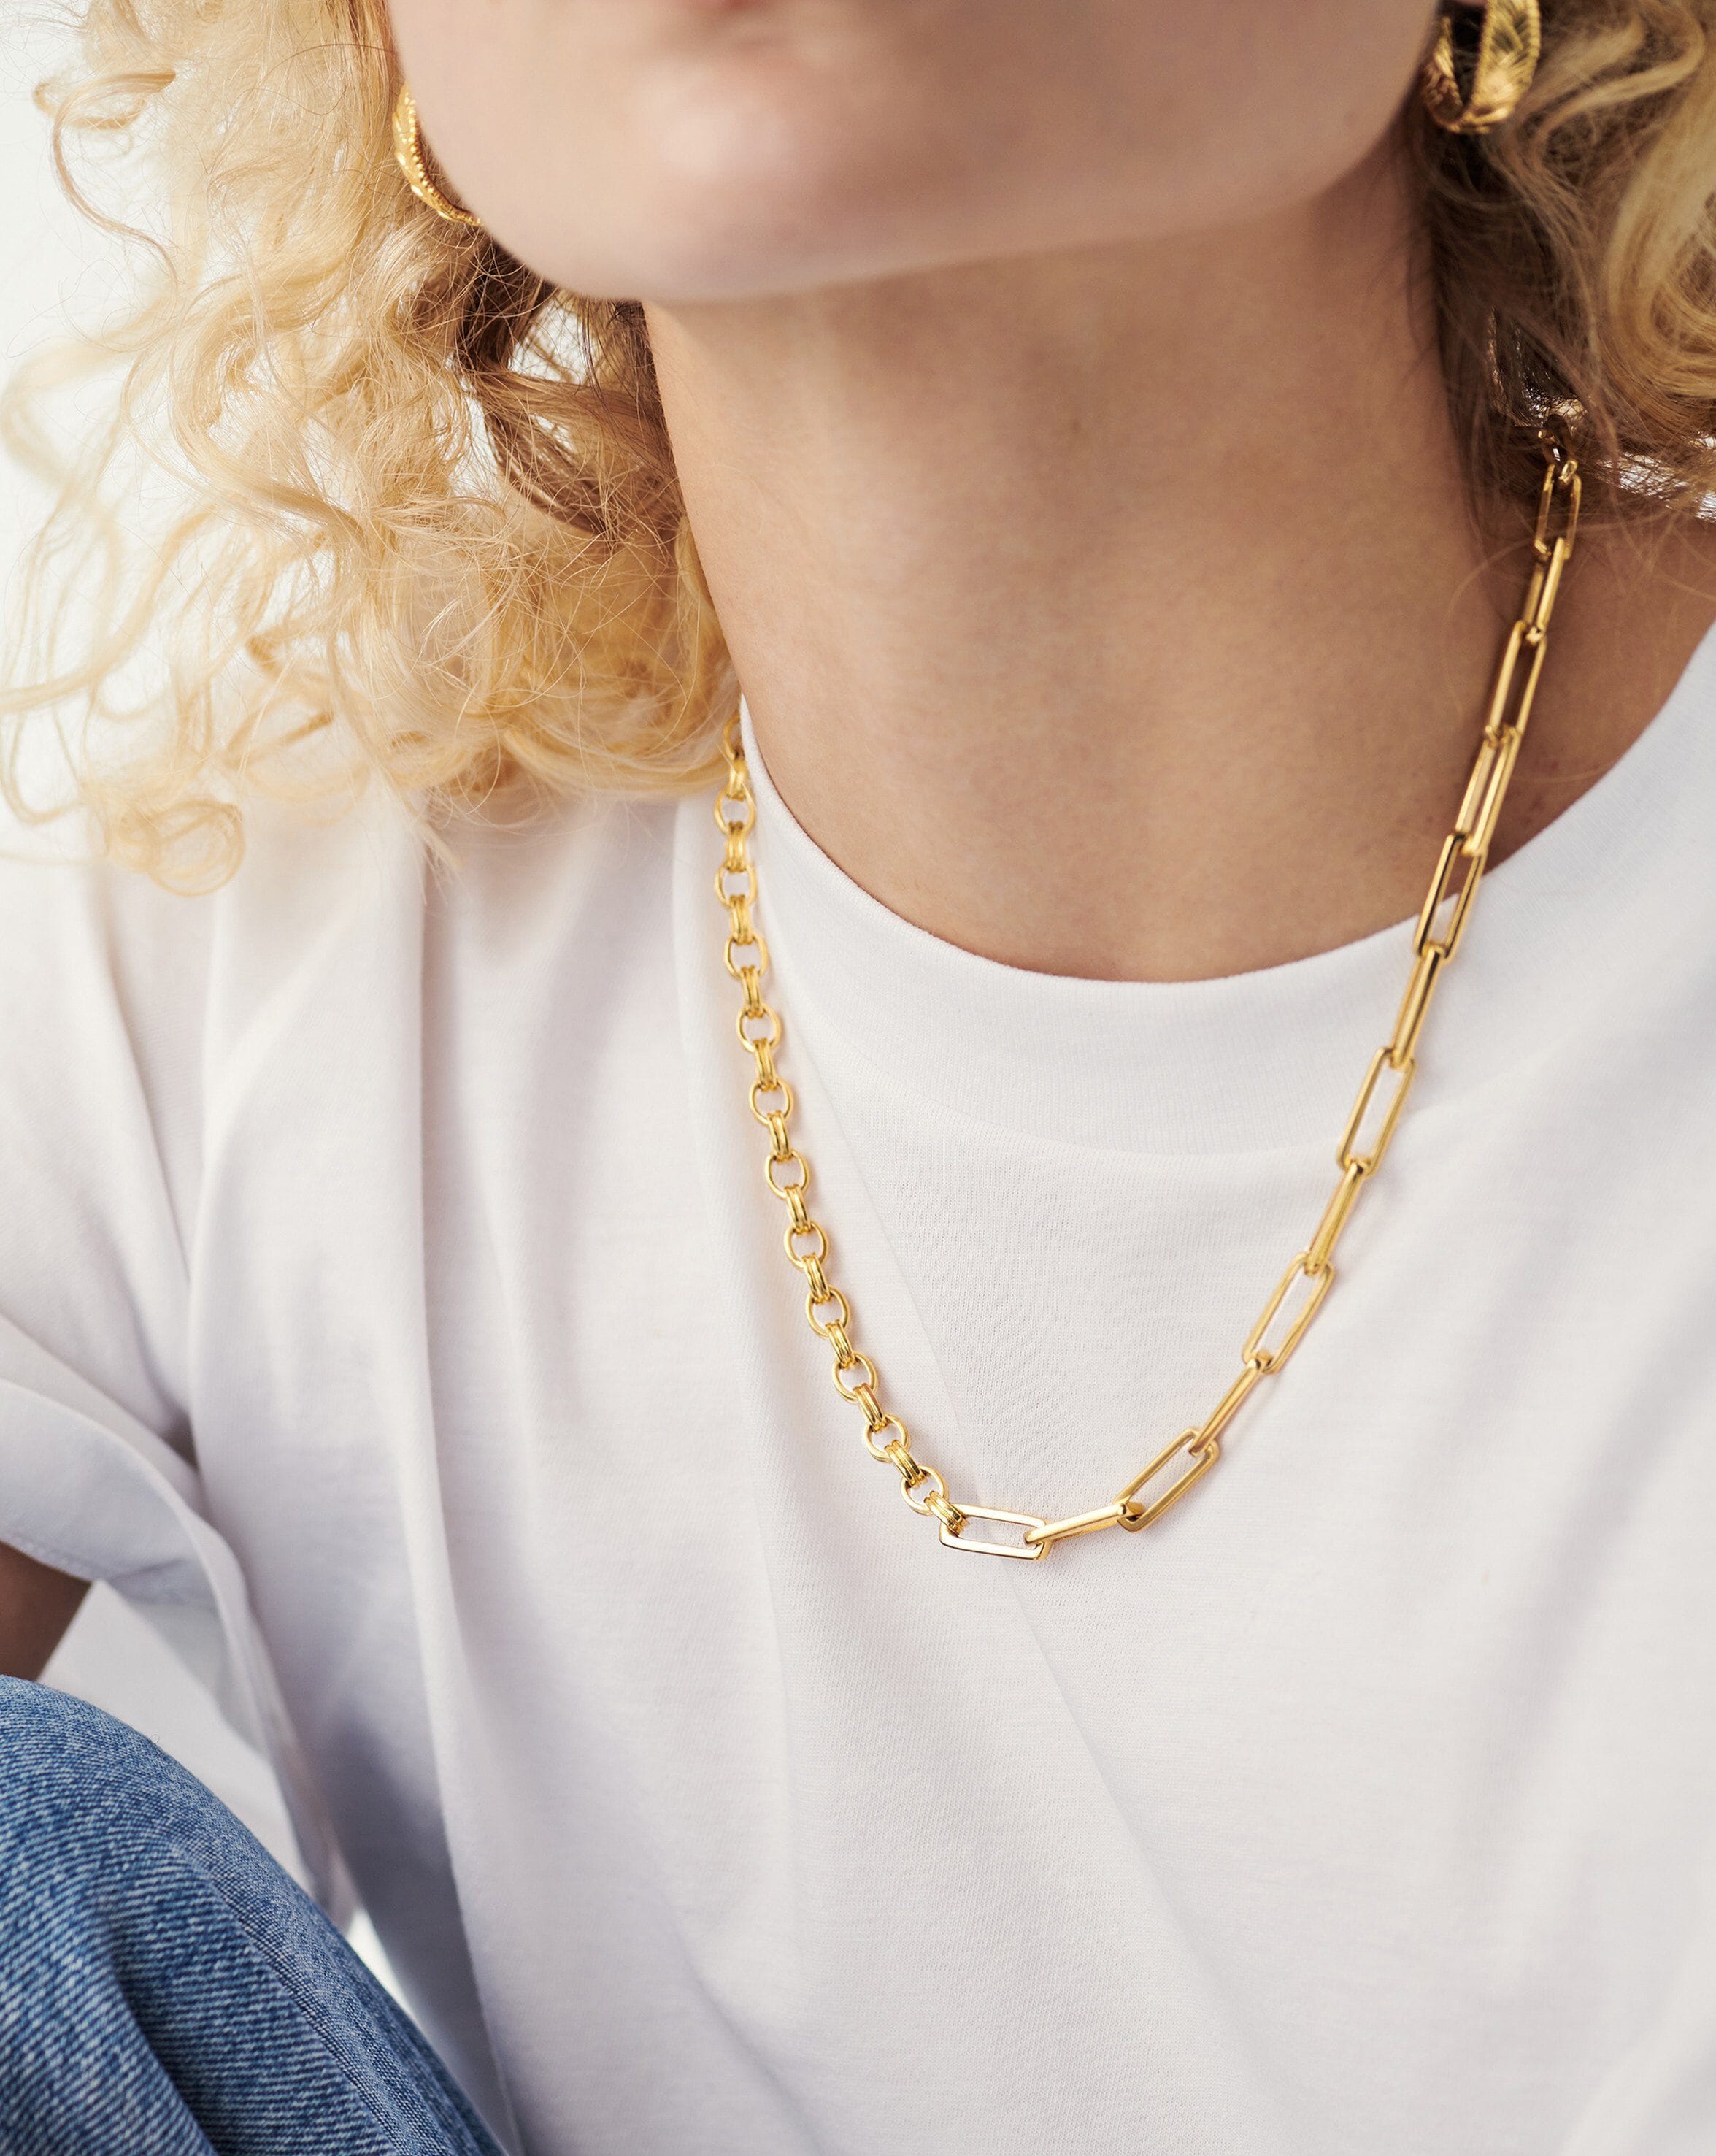 Deconstructed Axiom Chain Necklace | 18ct Gold Plated Necklaces Missoma 